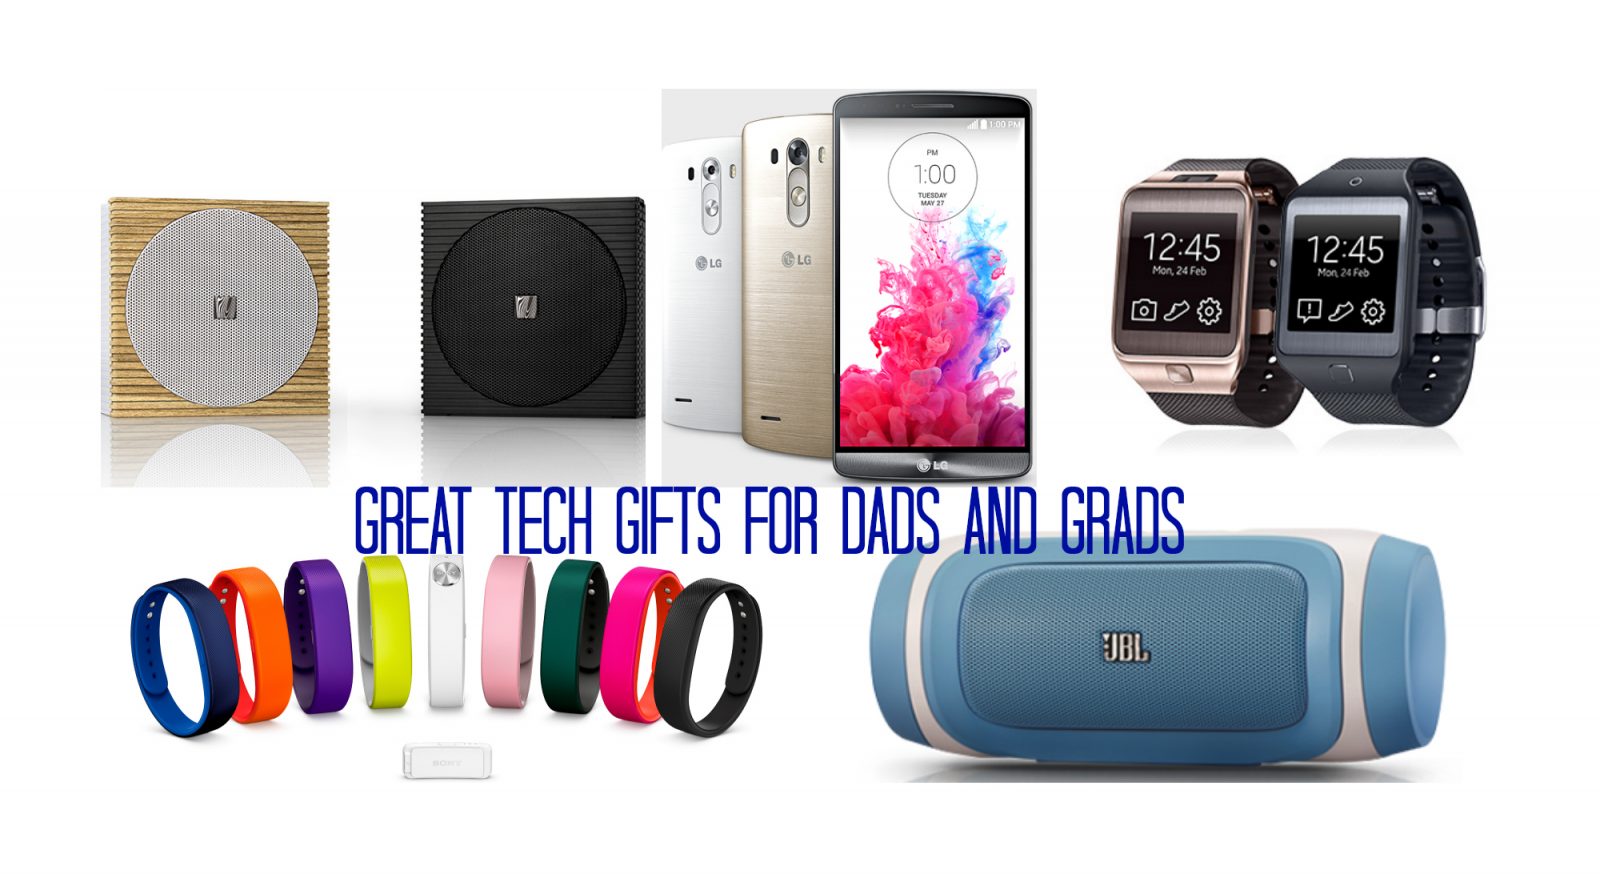 Dads and Grads gift guide tech we like.jpg